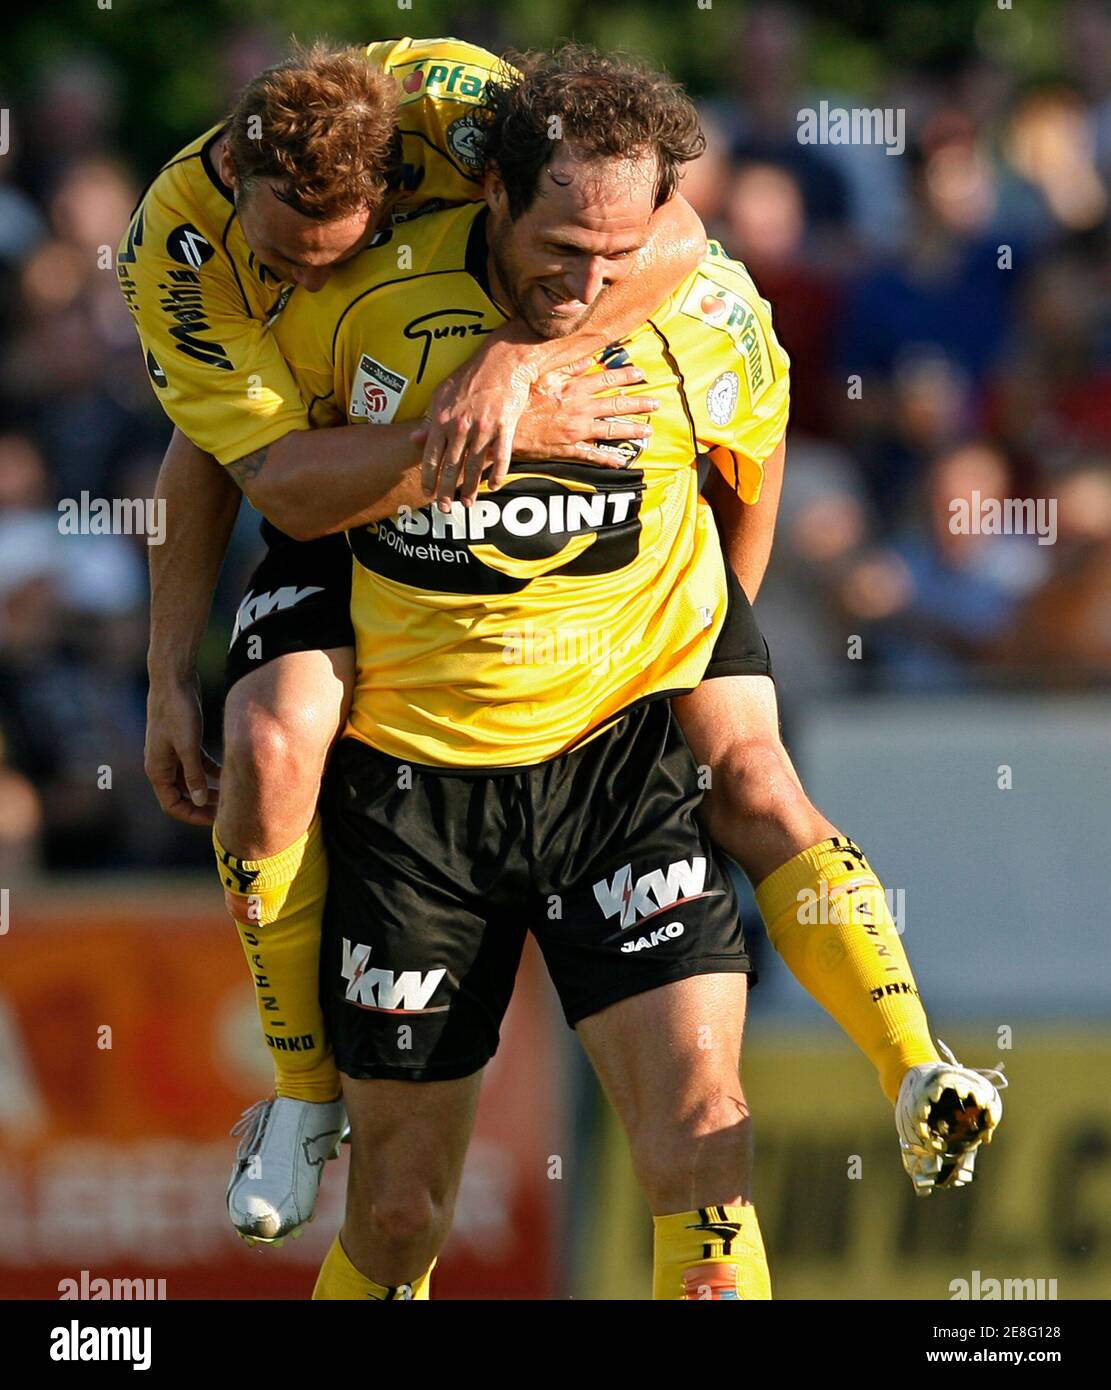 Altach's Roland Kirchler (front) celebrates with team mate Kai Schoppitsch after scoring against Ried during their Austrian league soccer match in Altach July 14, 2007. REUTERS/Miro Kuzmanovic (AUSTRIA) Stock Photo